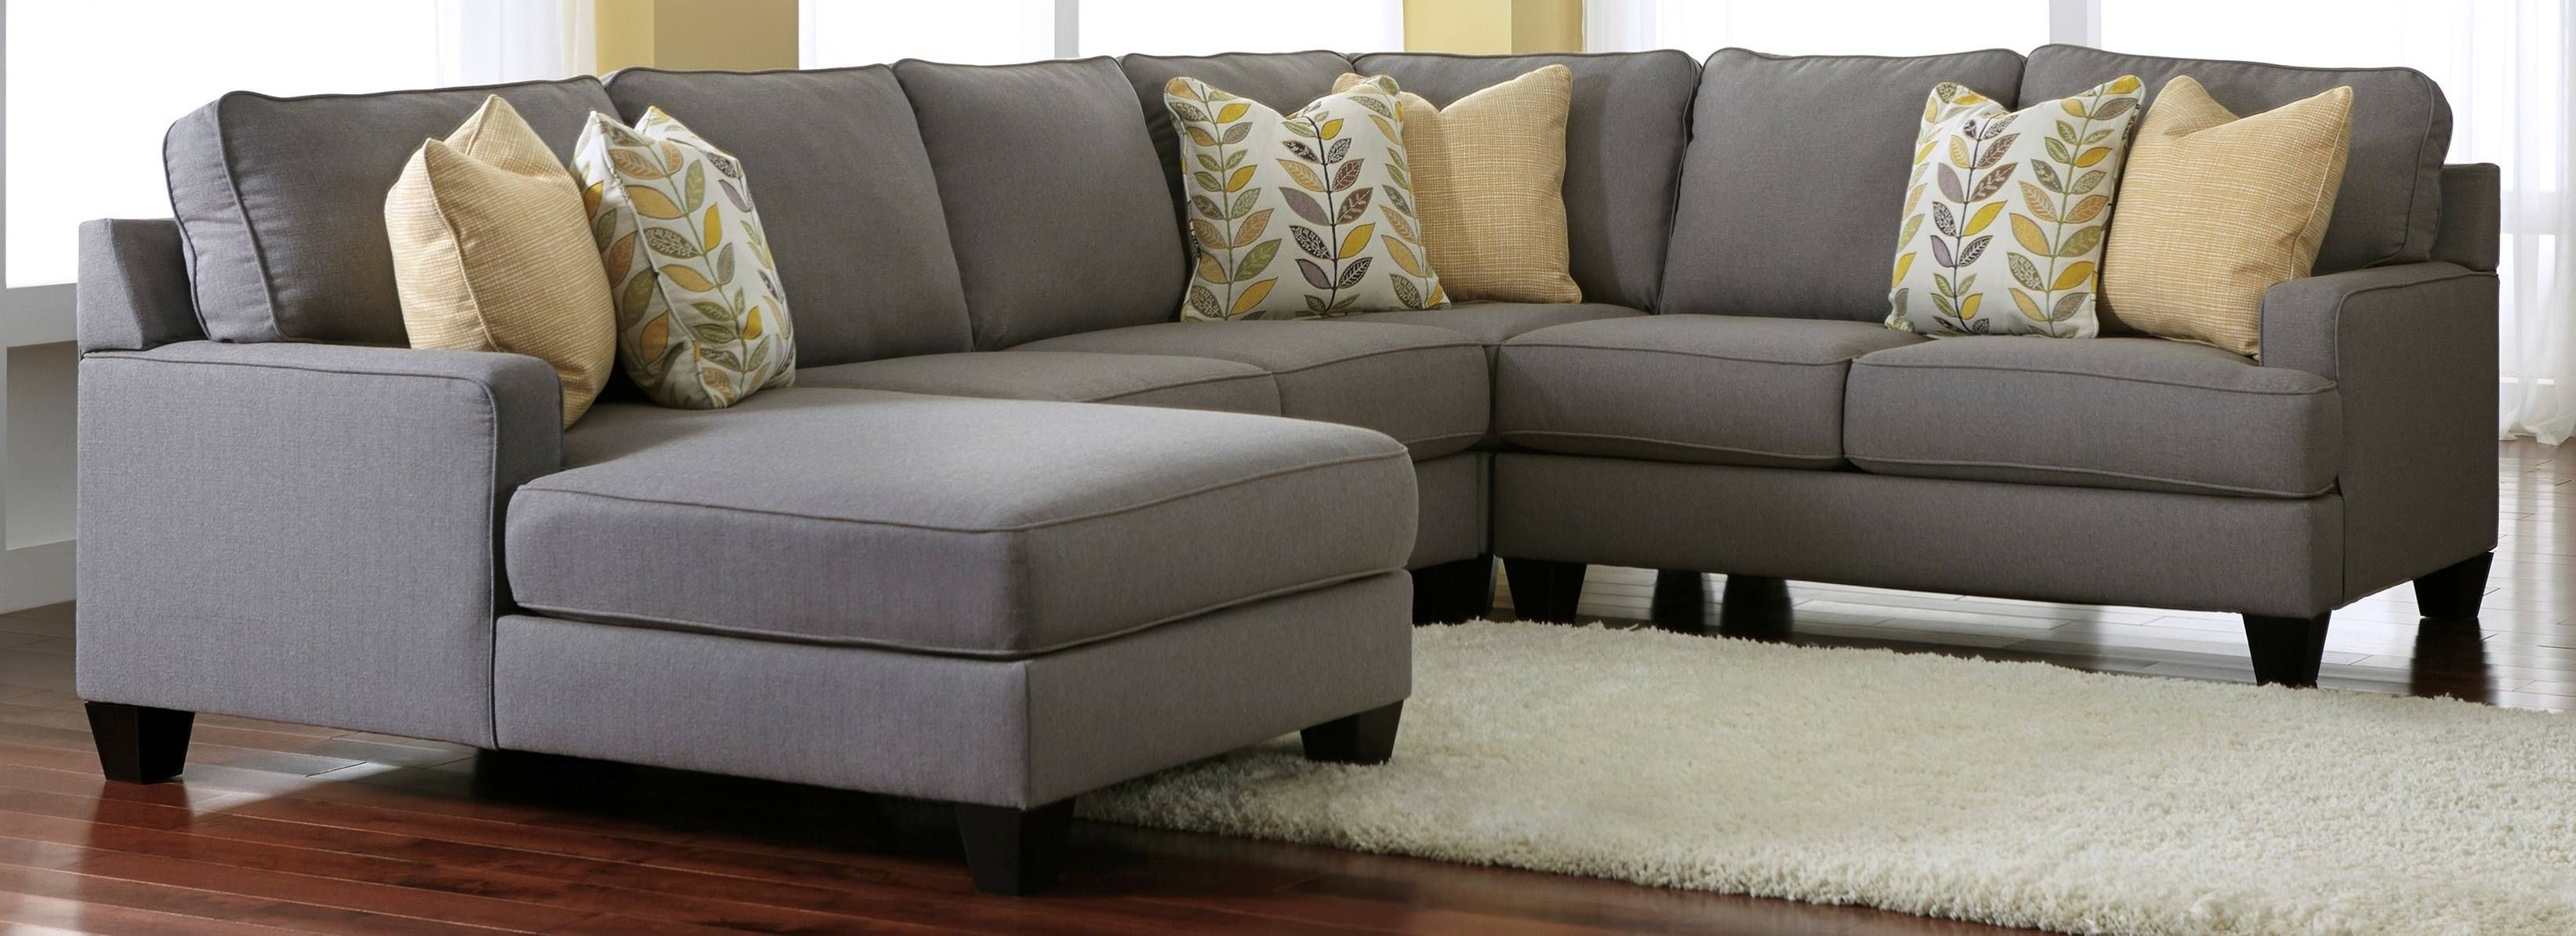 Fresh Gray Sectional Sofa Ashley Furniture 11 On Puzzle Sectional Pertaining To Puzzle Sectional Sofas (View 10 of 15)